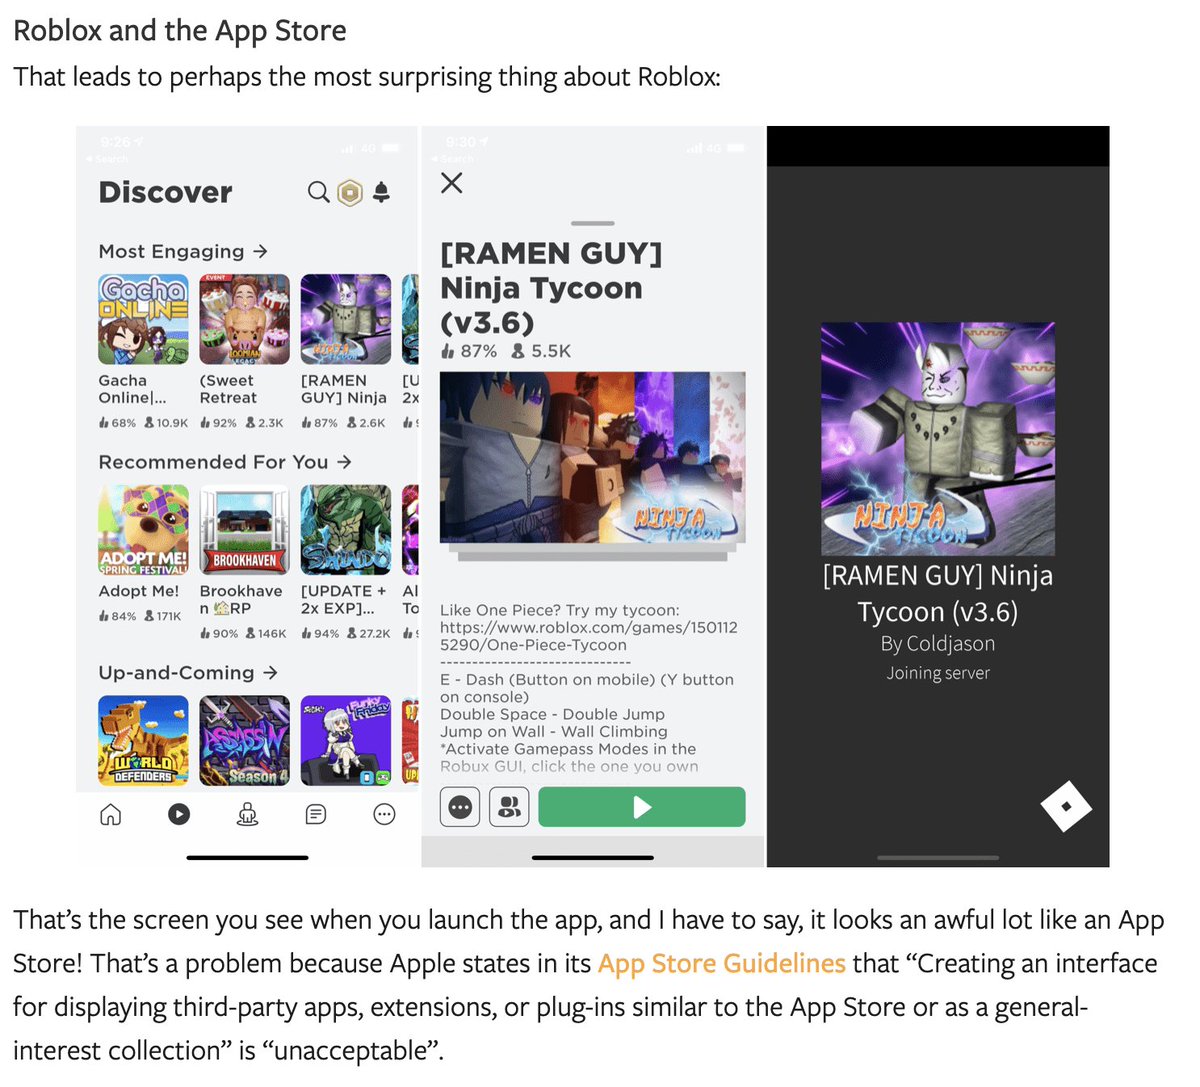 Francois Laberge On Twitter People May Have Noticed This Already In The Stratechery Article On Roblox See Attached But Apple Allows Roblox An App Store In Their Ios App And None Of - wall climing in roblox